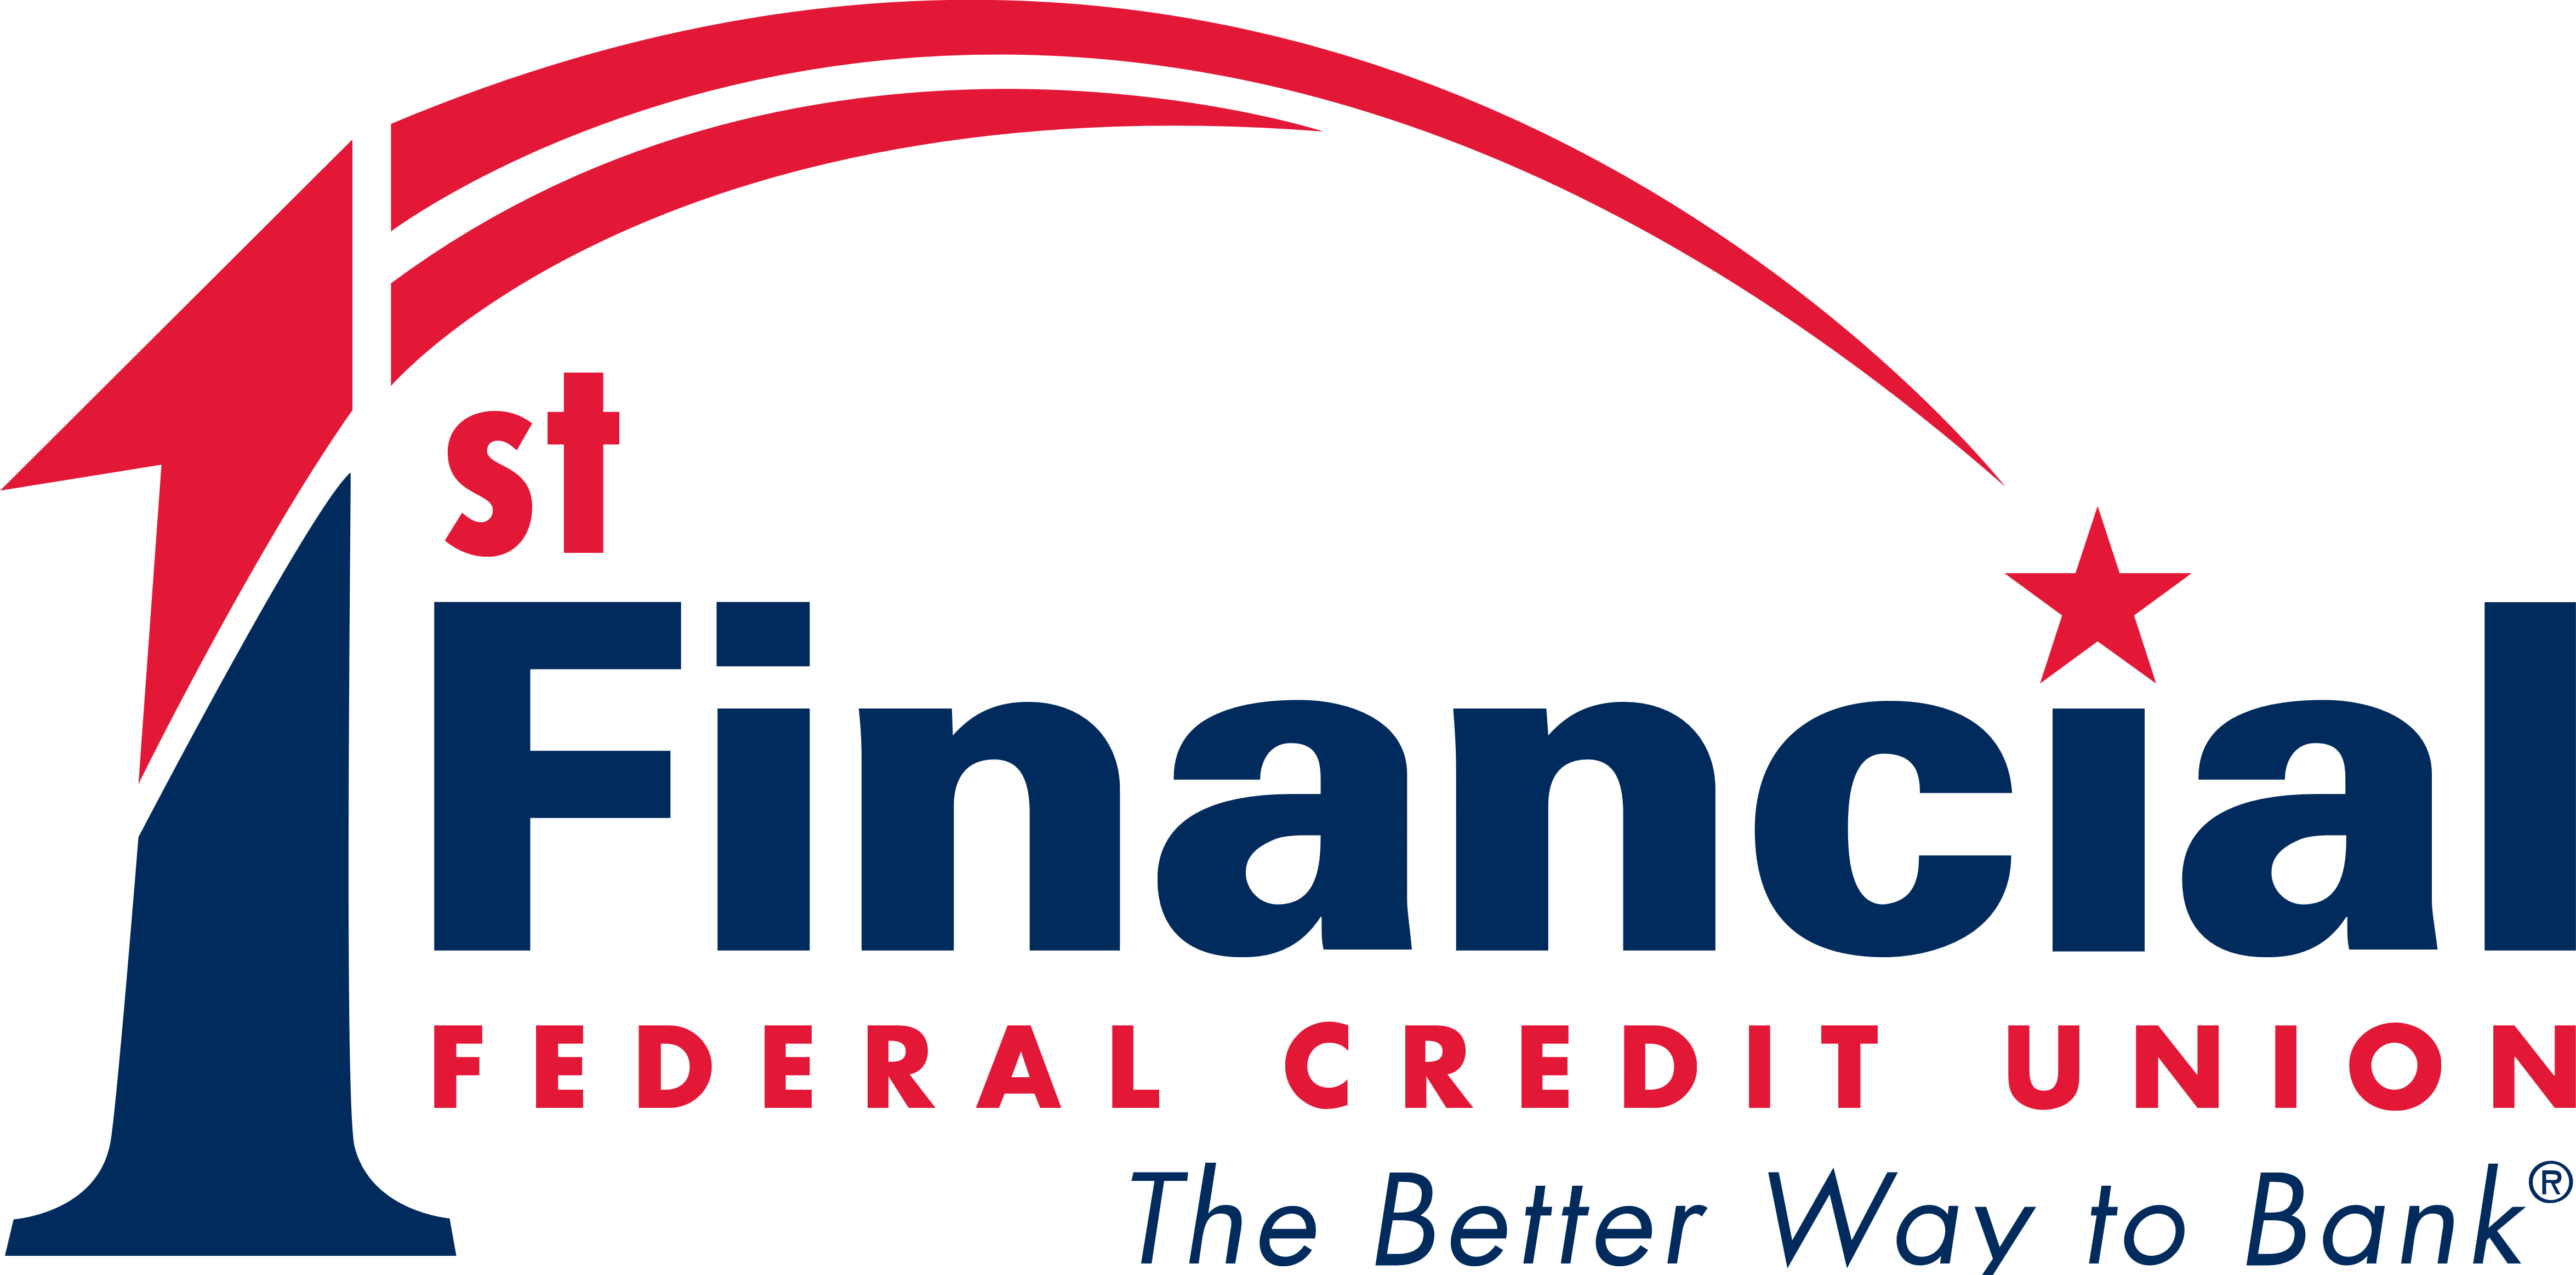 1st Financial Federal Credit Union – Logos Download